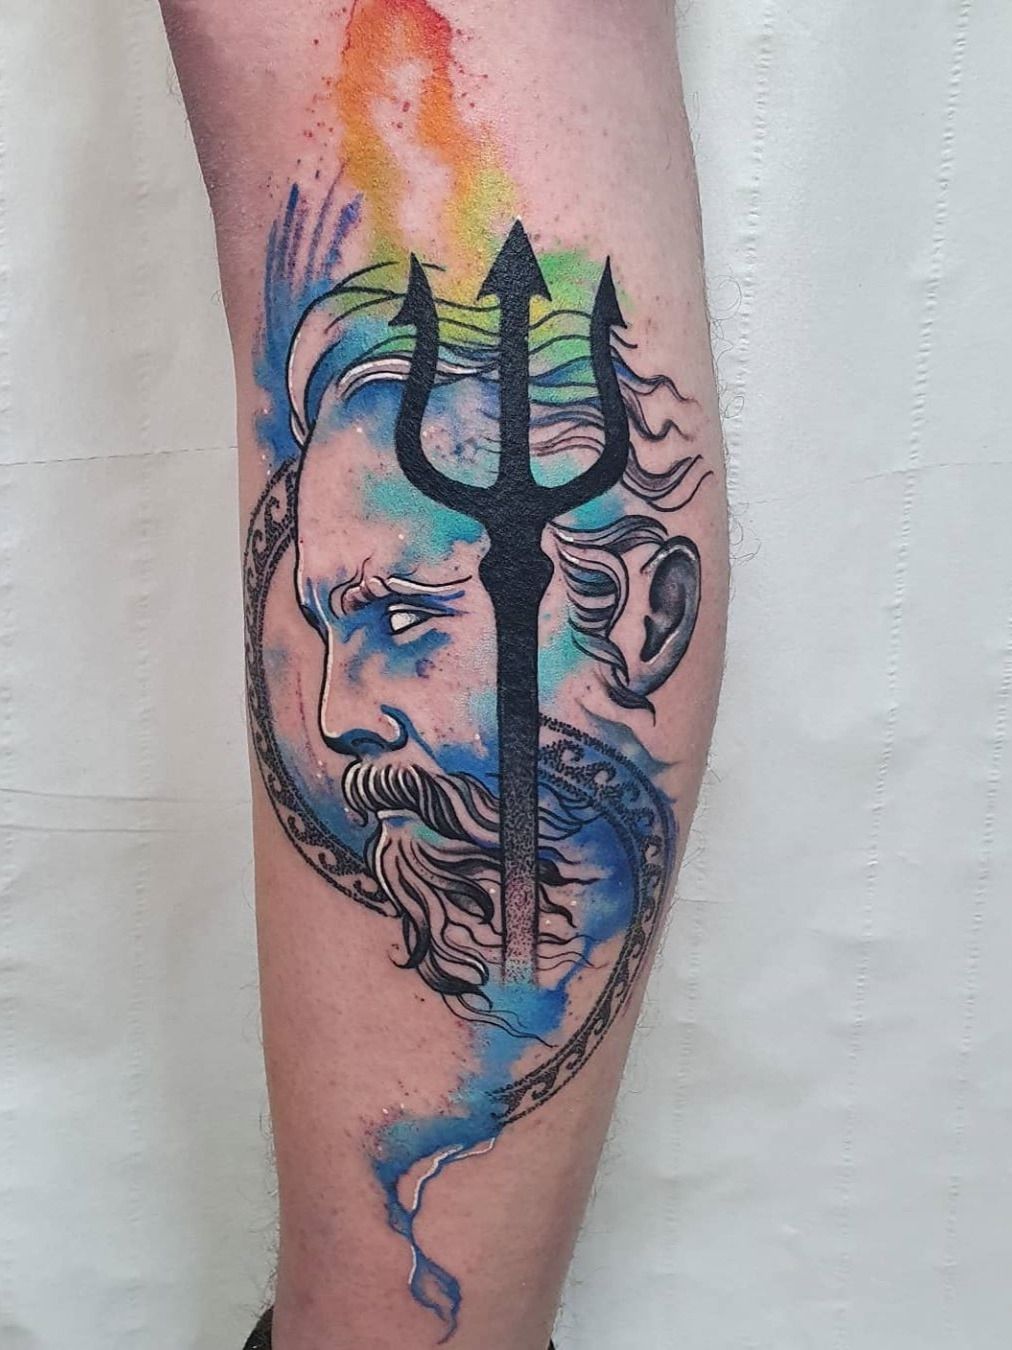 Bust of Neptune tattoo located on the inner forearm